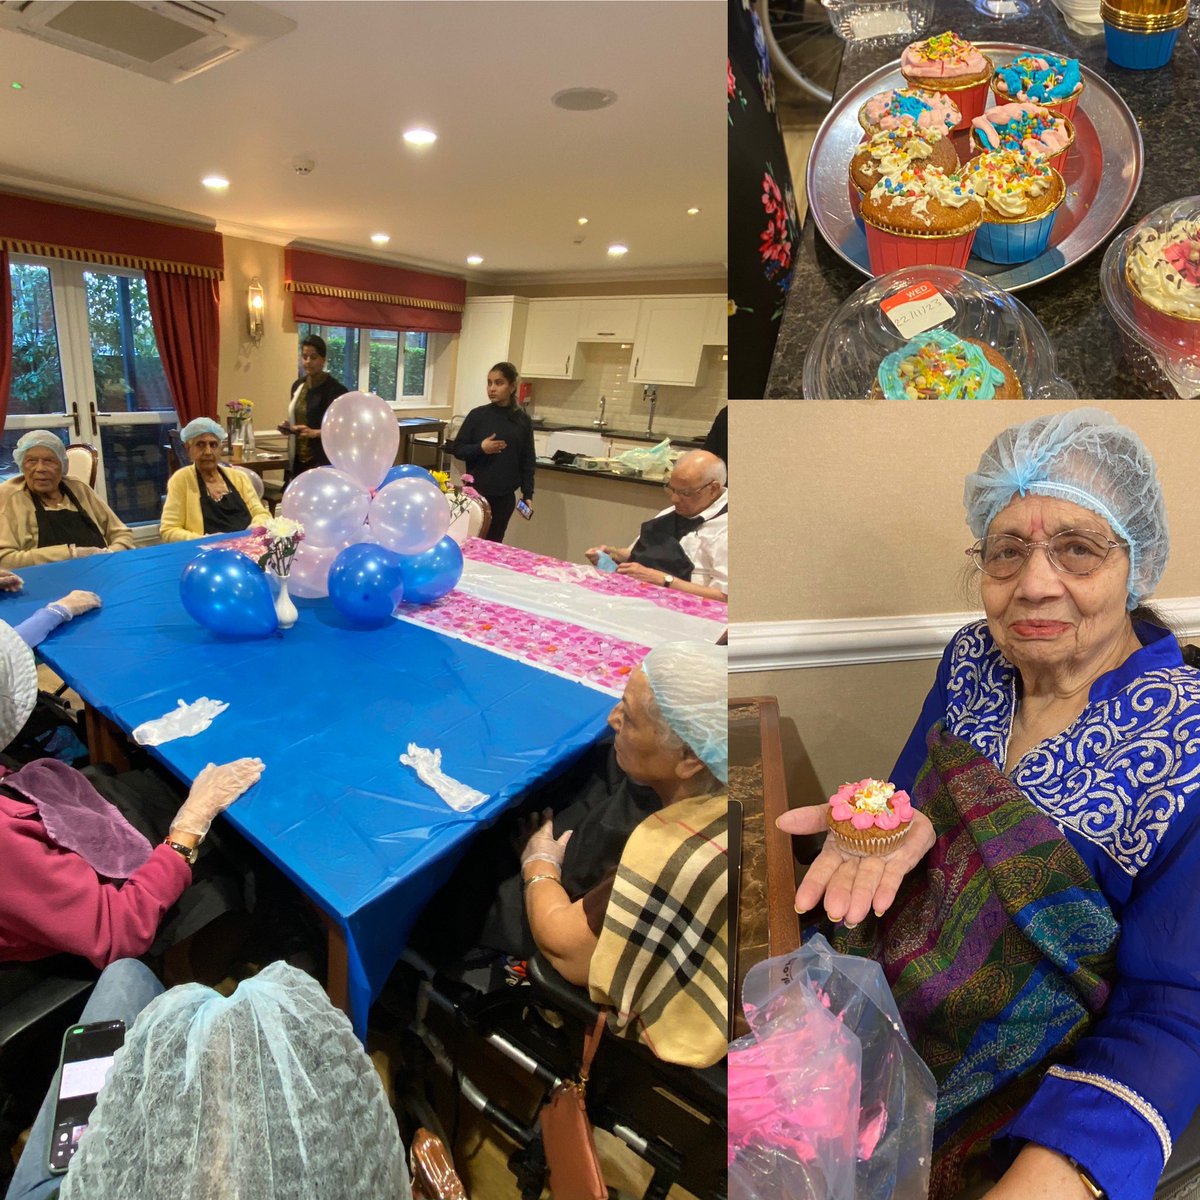 Incredible afternoon at Karuna Manor Care Home part of @TLCCARE3 for @Cake4kindness Day. The residents came together to decorate cakes that were later donated to @L_C_Kitchen - so much love ❤️ & positive vibrations - #loneliness #community #socialisolation #cake4kindness